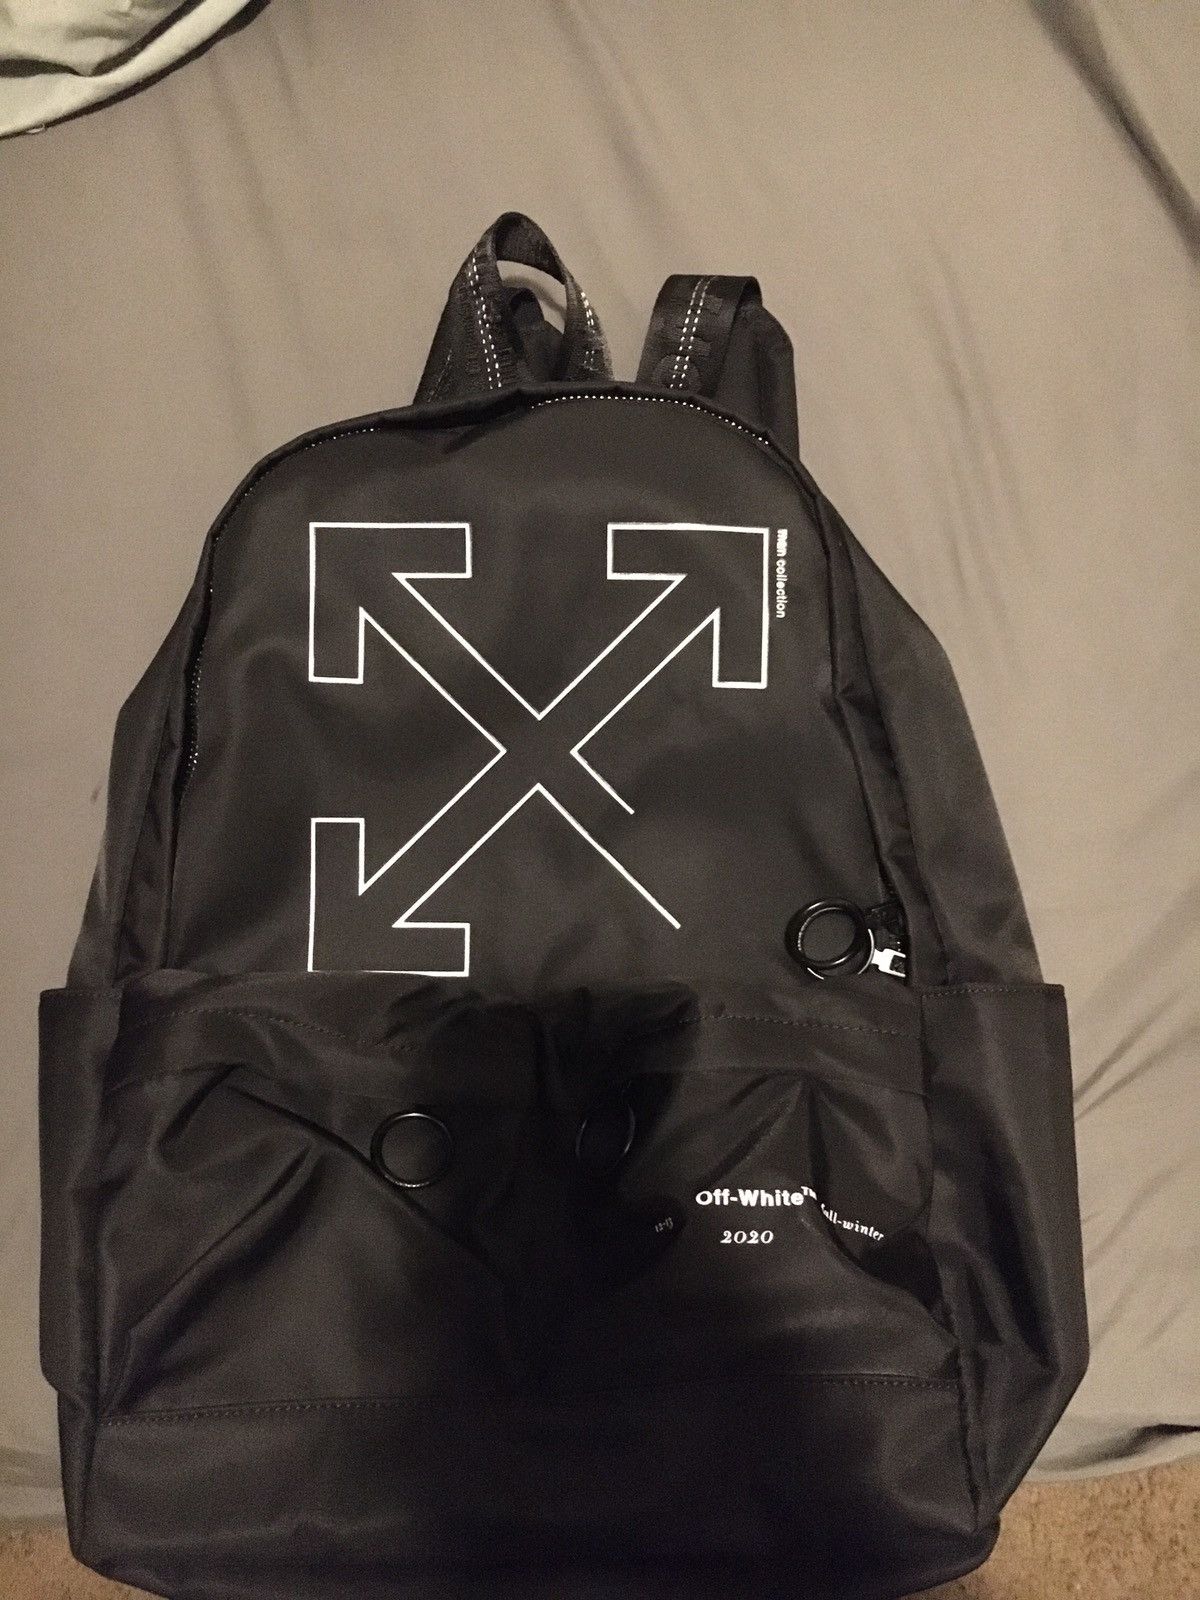 Off-White Unfinished Backpack | Grailed